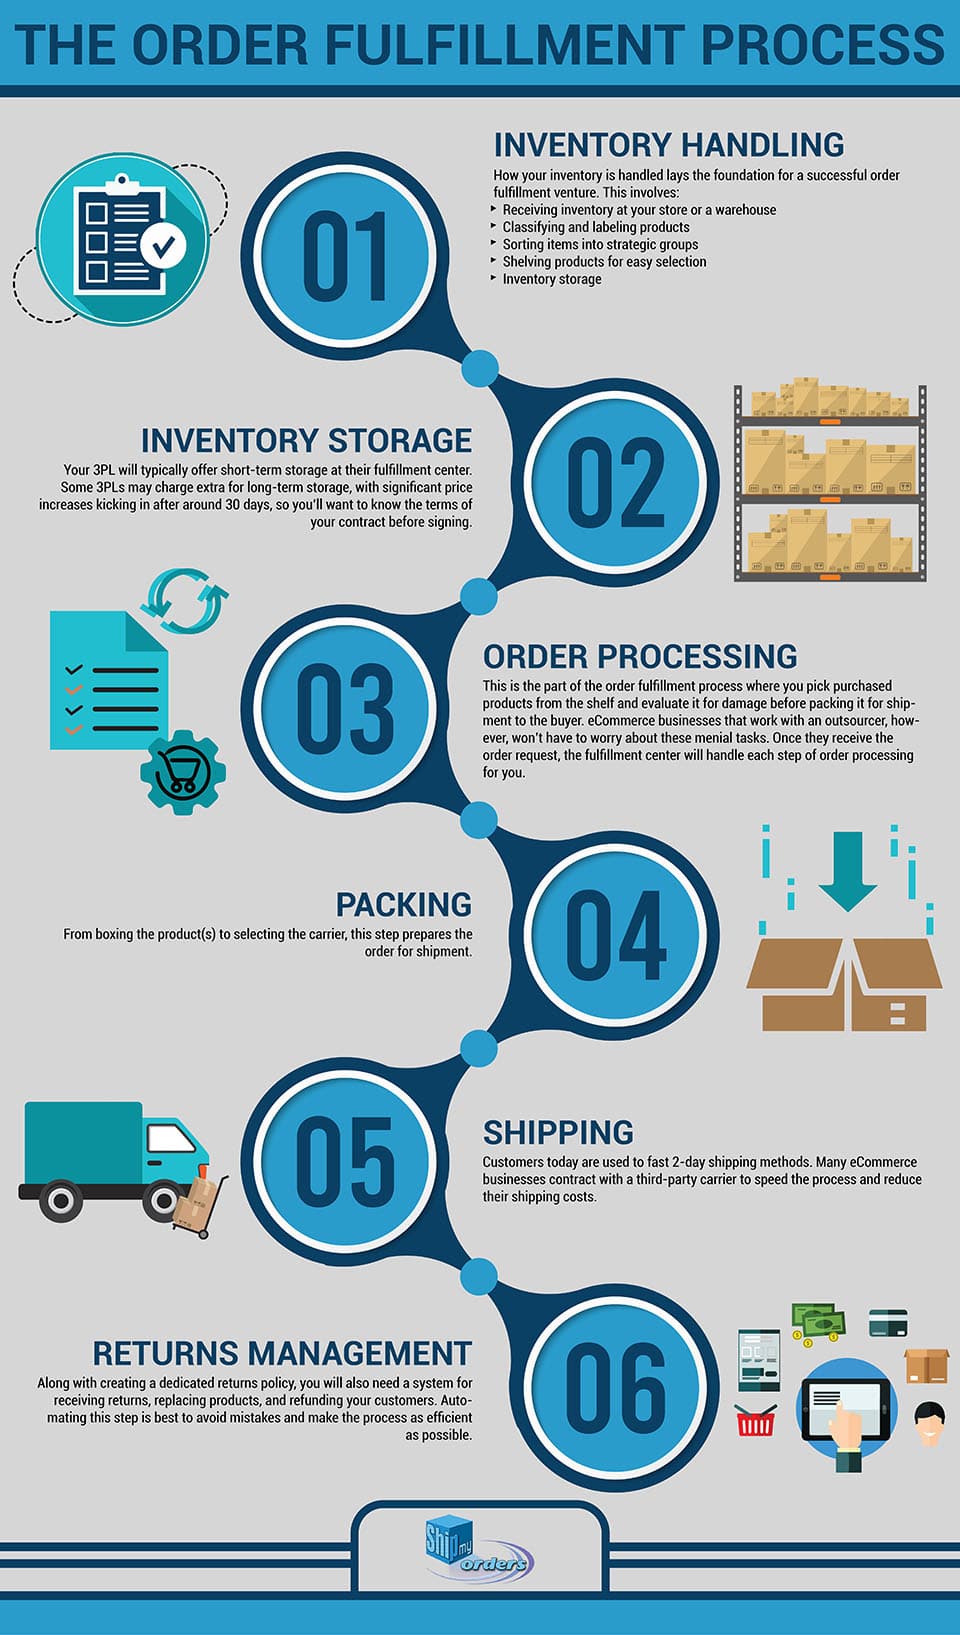 Order Fulfillment Process infographic